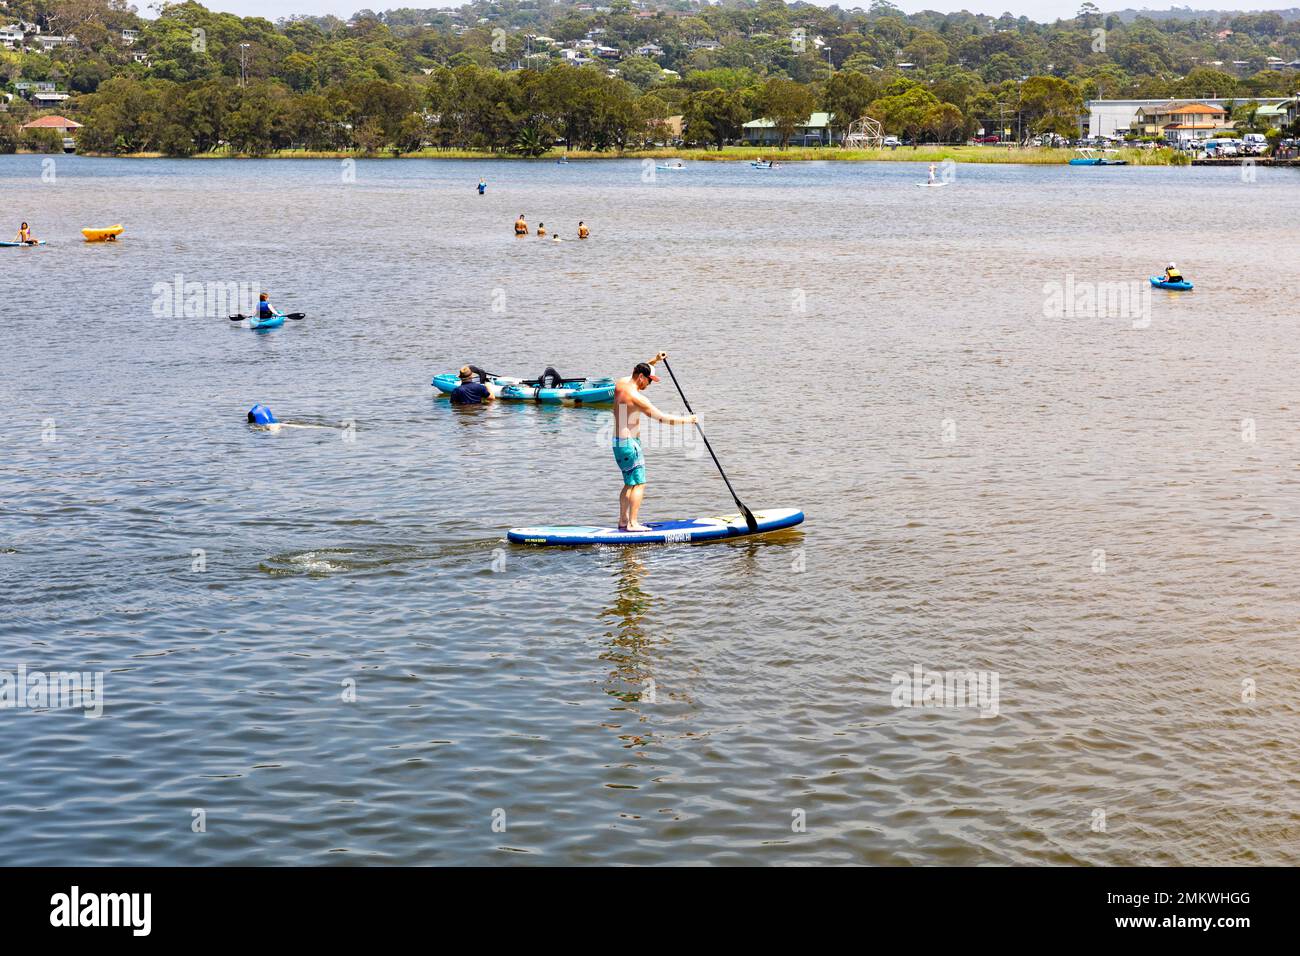 Man paddle boarding in Narrabeen lake lagoon Sydney on a hot summers day, kayak and others enjoy the cool water,Sydney,NSW,Australia Stock Photo